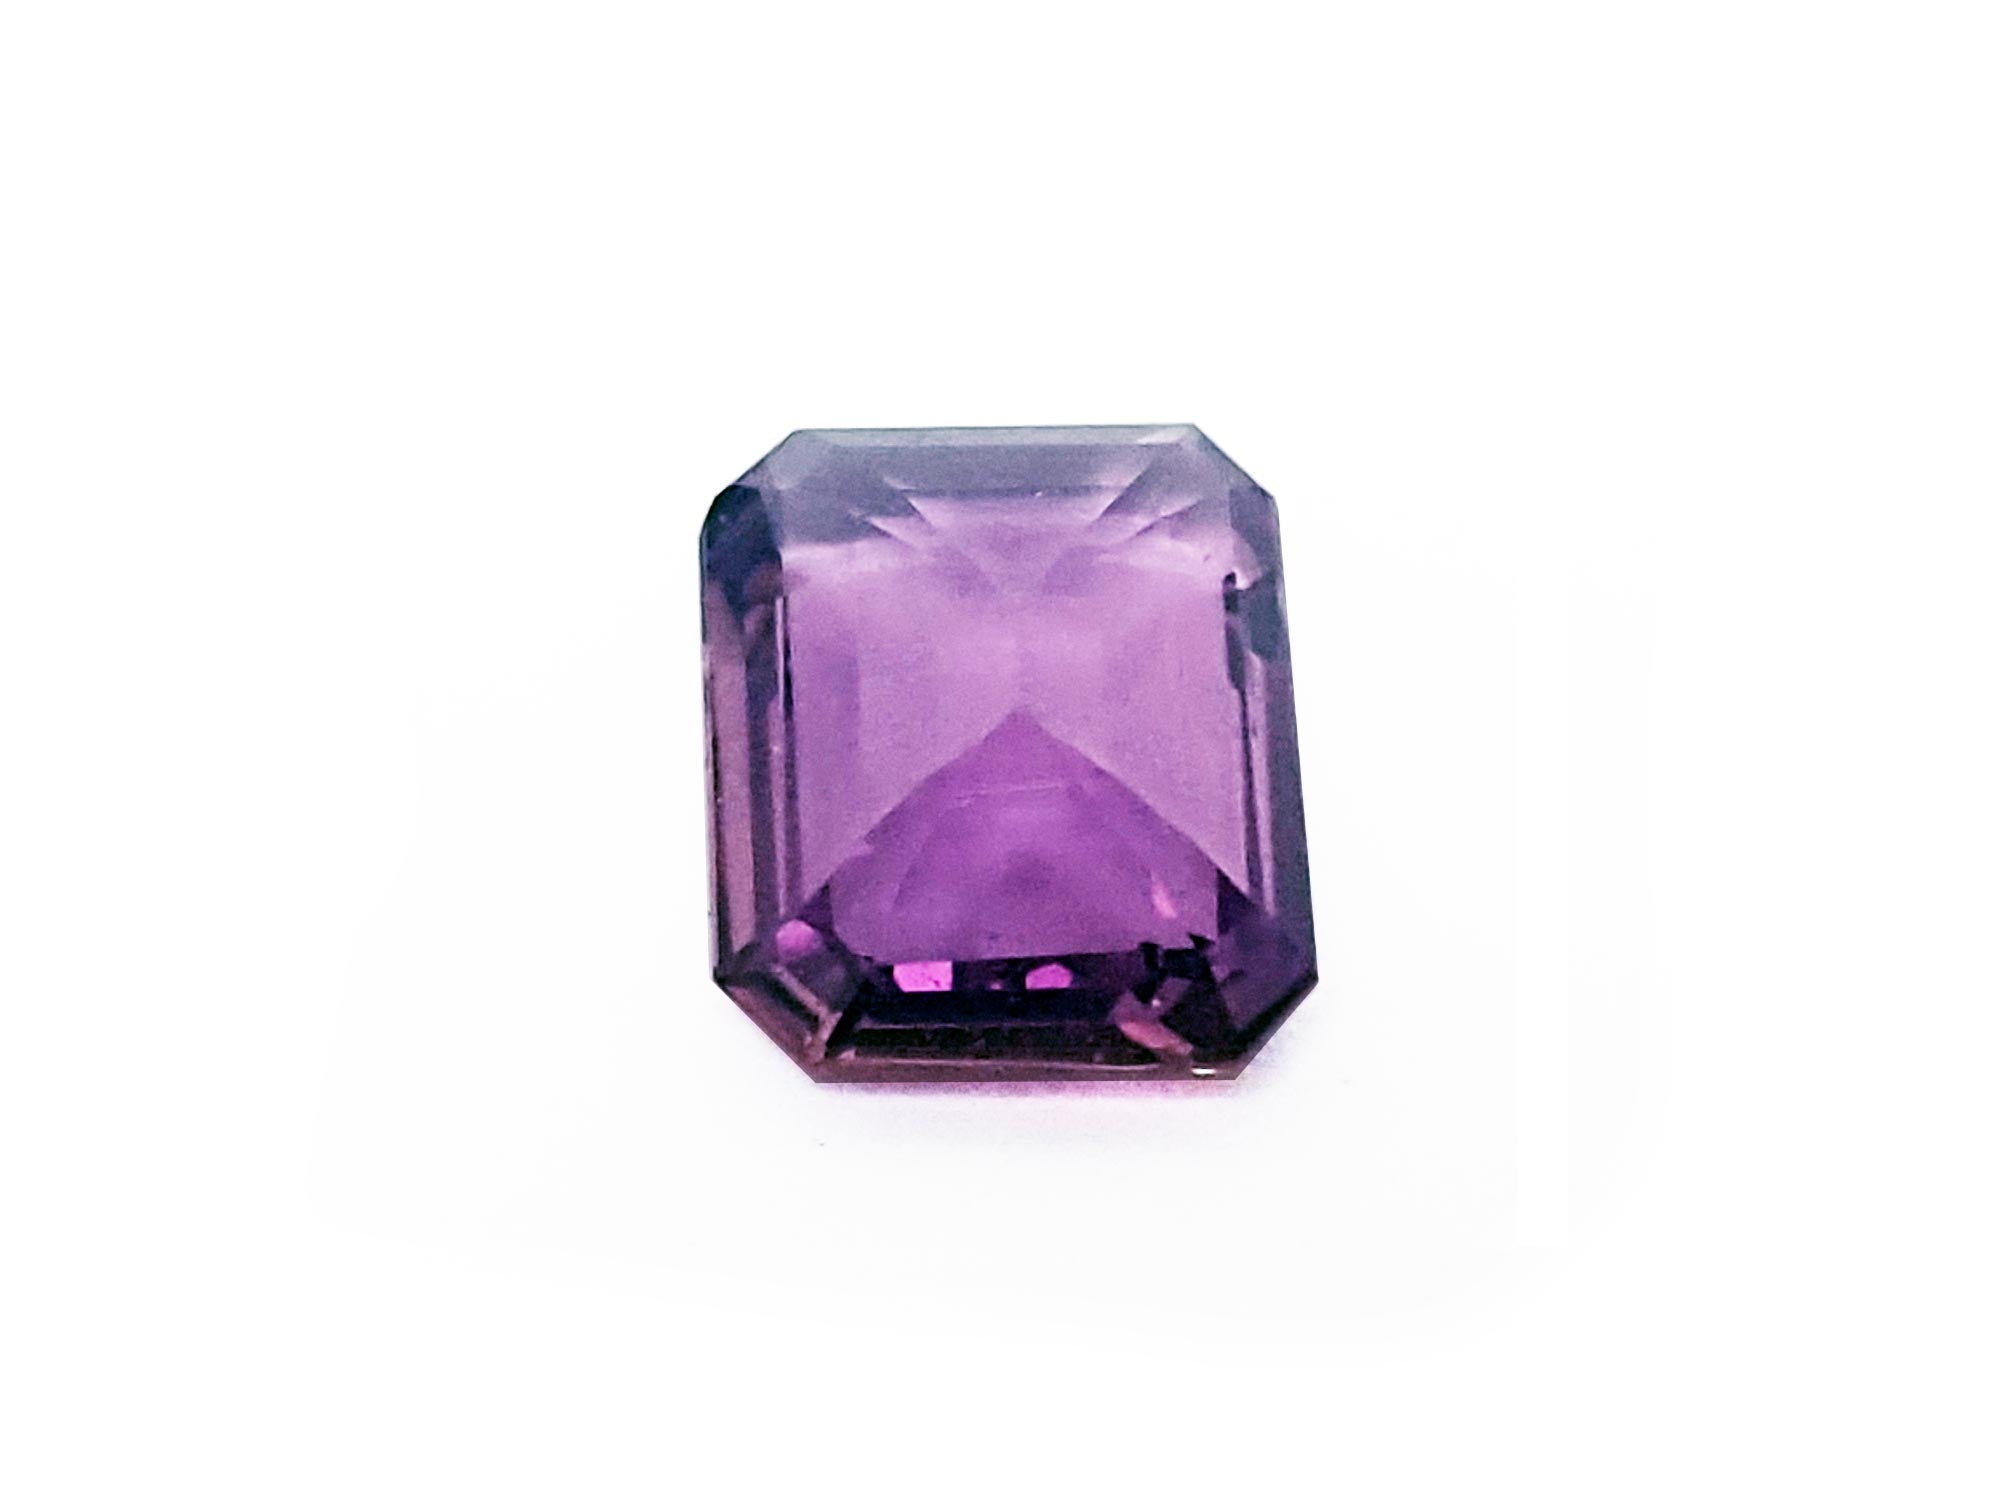 4.05 ct. Pink Sapphire GIA Certified for Sale